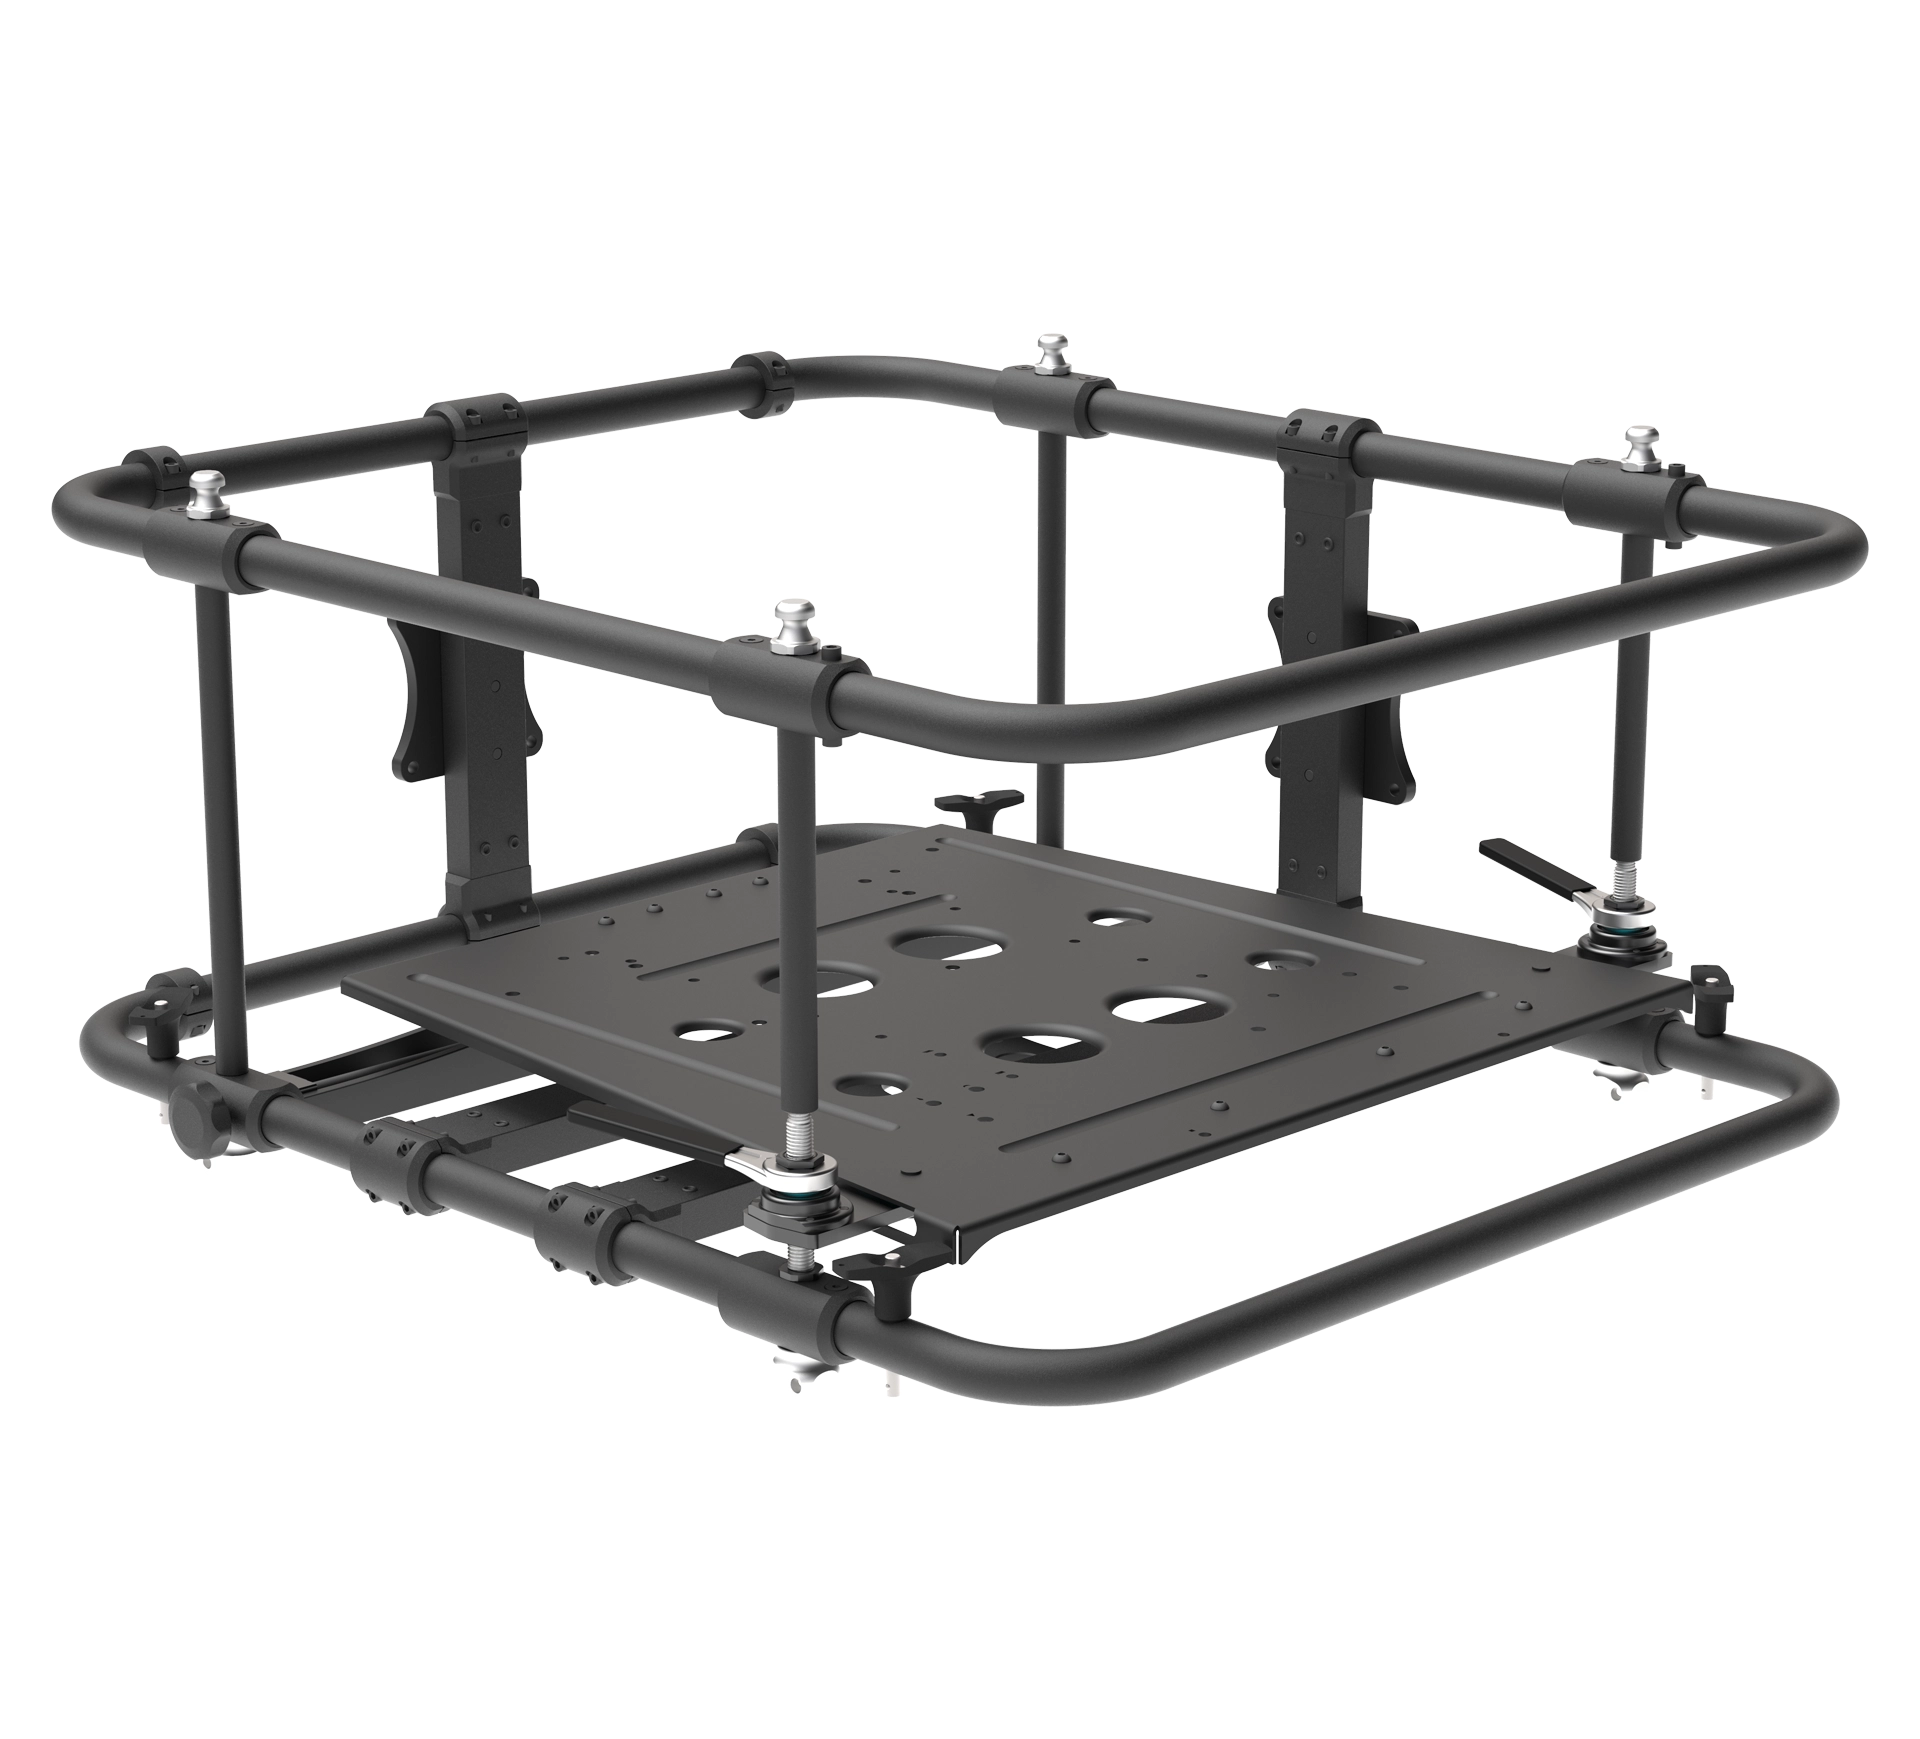 Rigtec Air Frame X20 Projector Rigging Frame